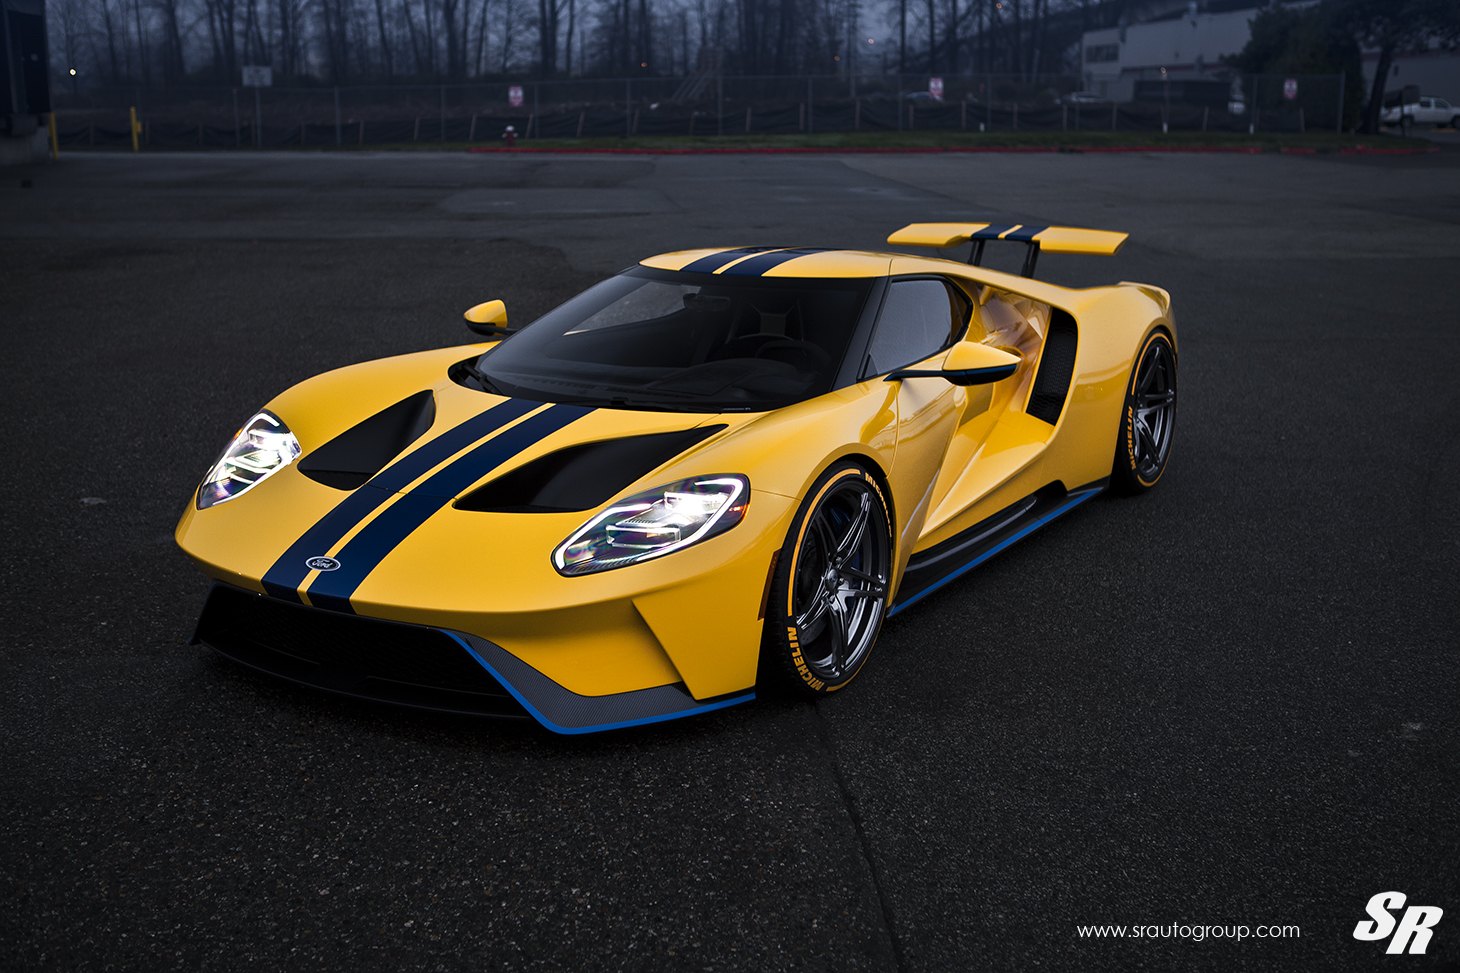 Custom LED-Bar Style Headlights on Yellow Ford GT - Photo by SR Auto Group